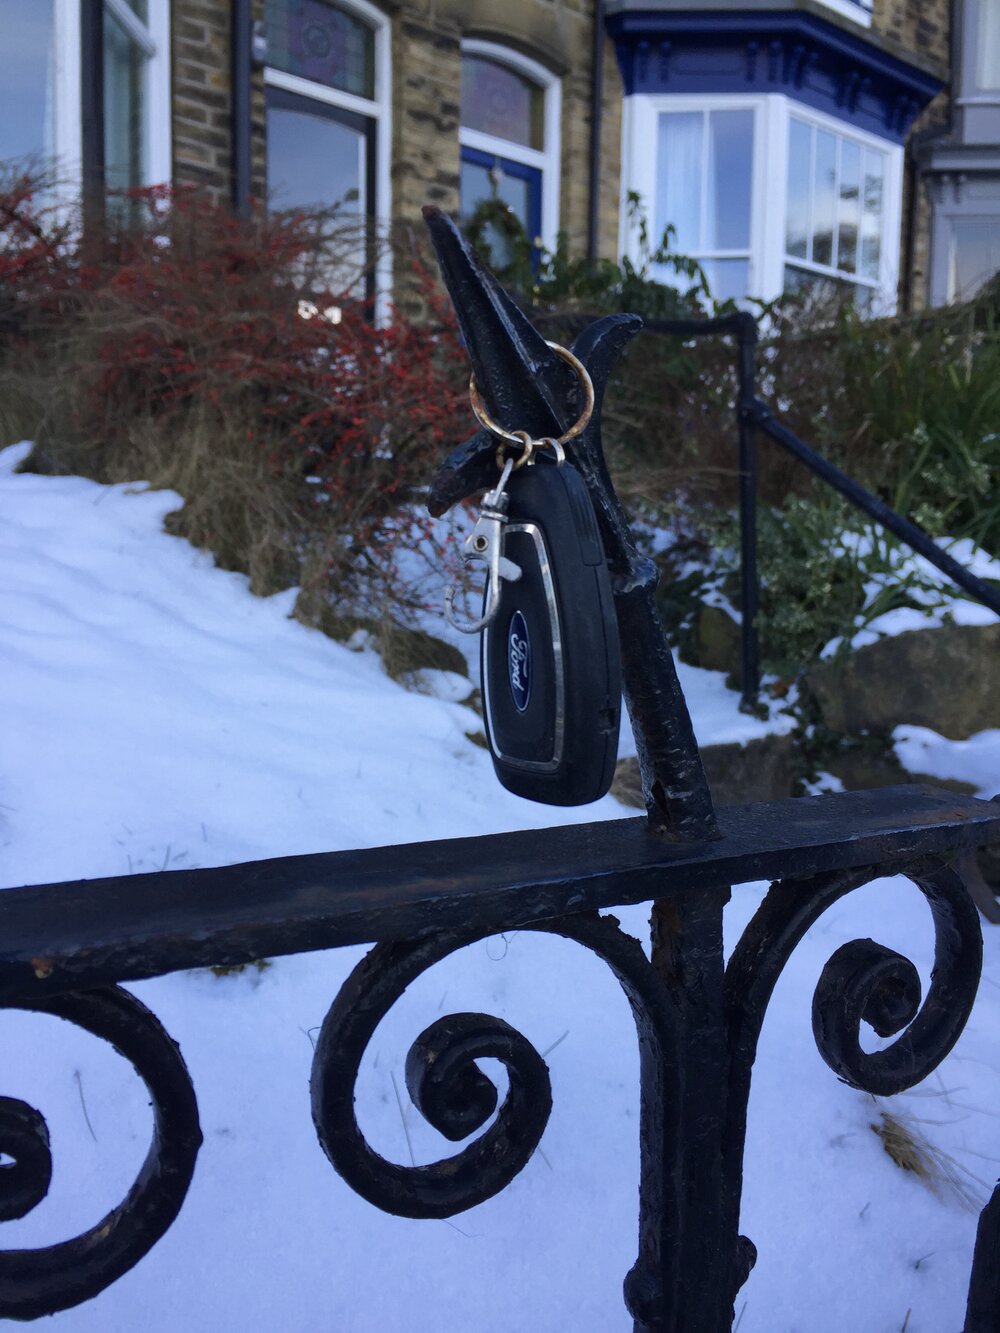  A car key on a key ring, mounted on the spike of someone’s front garden fence. The break in the clip probably reveals why this is here and not on someone’s person. 